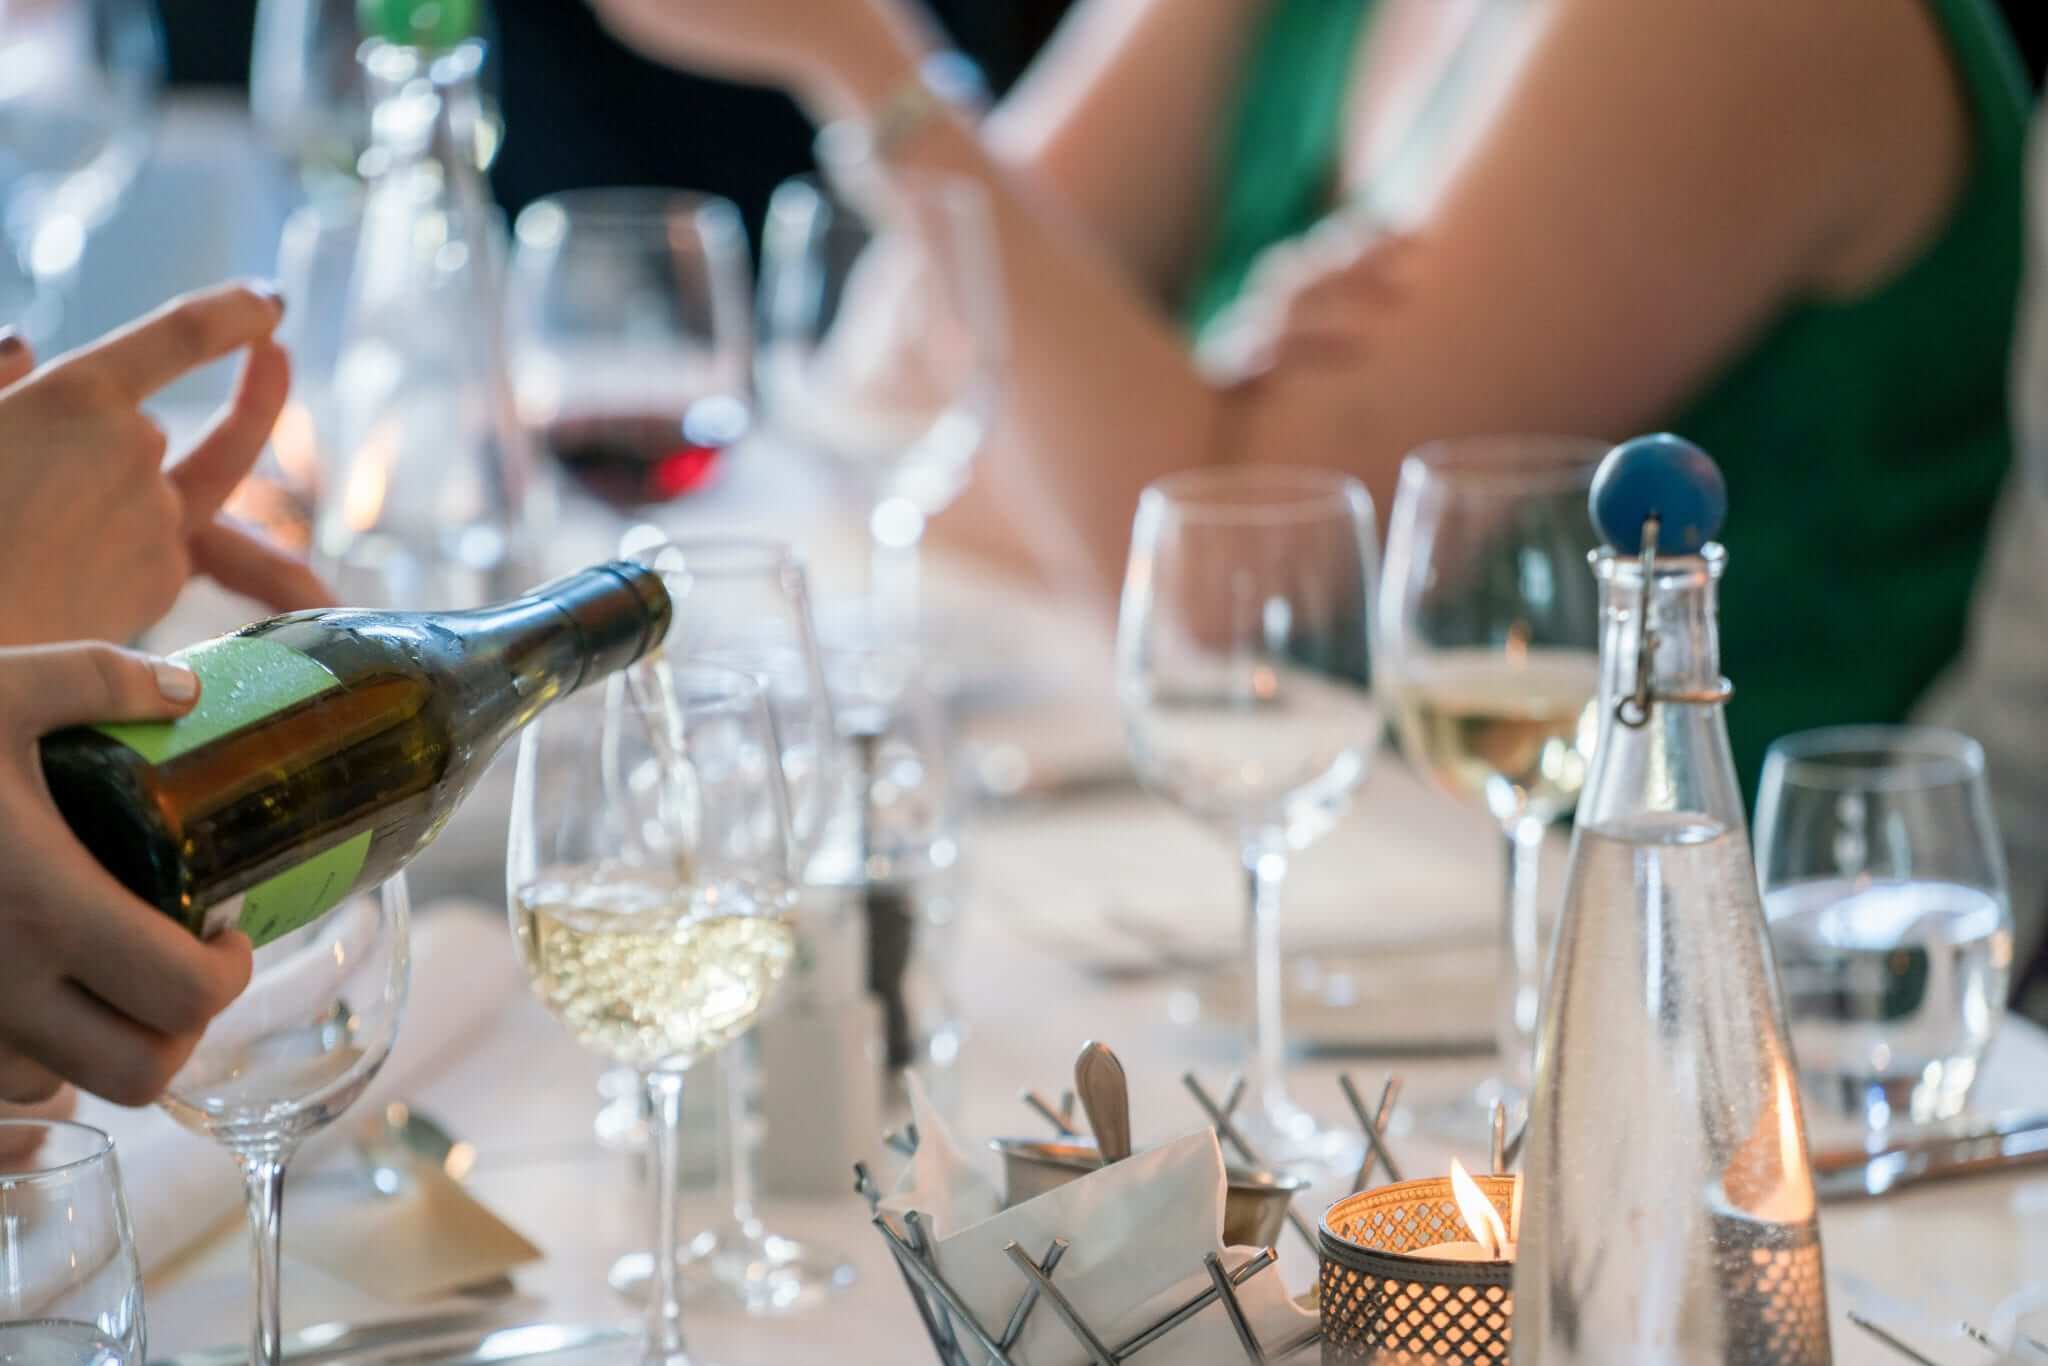 A person pours white wine into a glass at a dining table surrounded by guests.